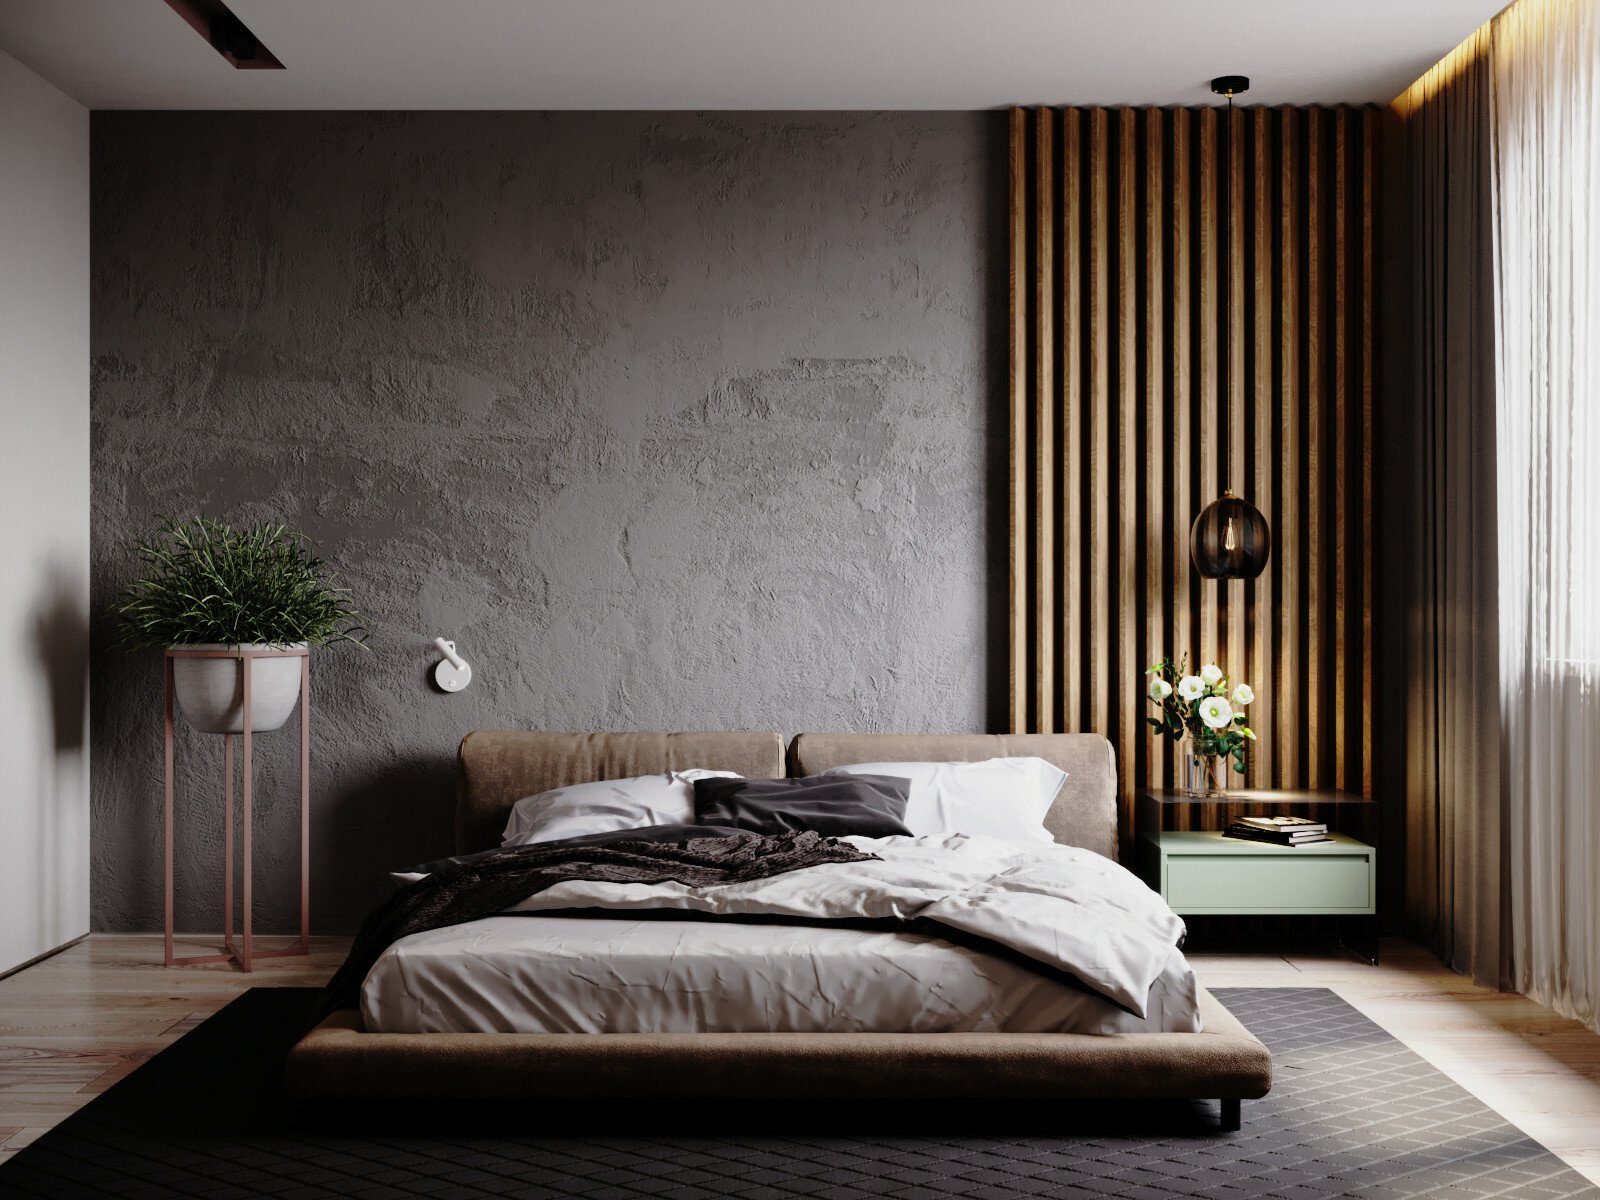 Color Palette Perfection: Choosing the Right Hues for a Small Bedroom